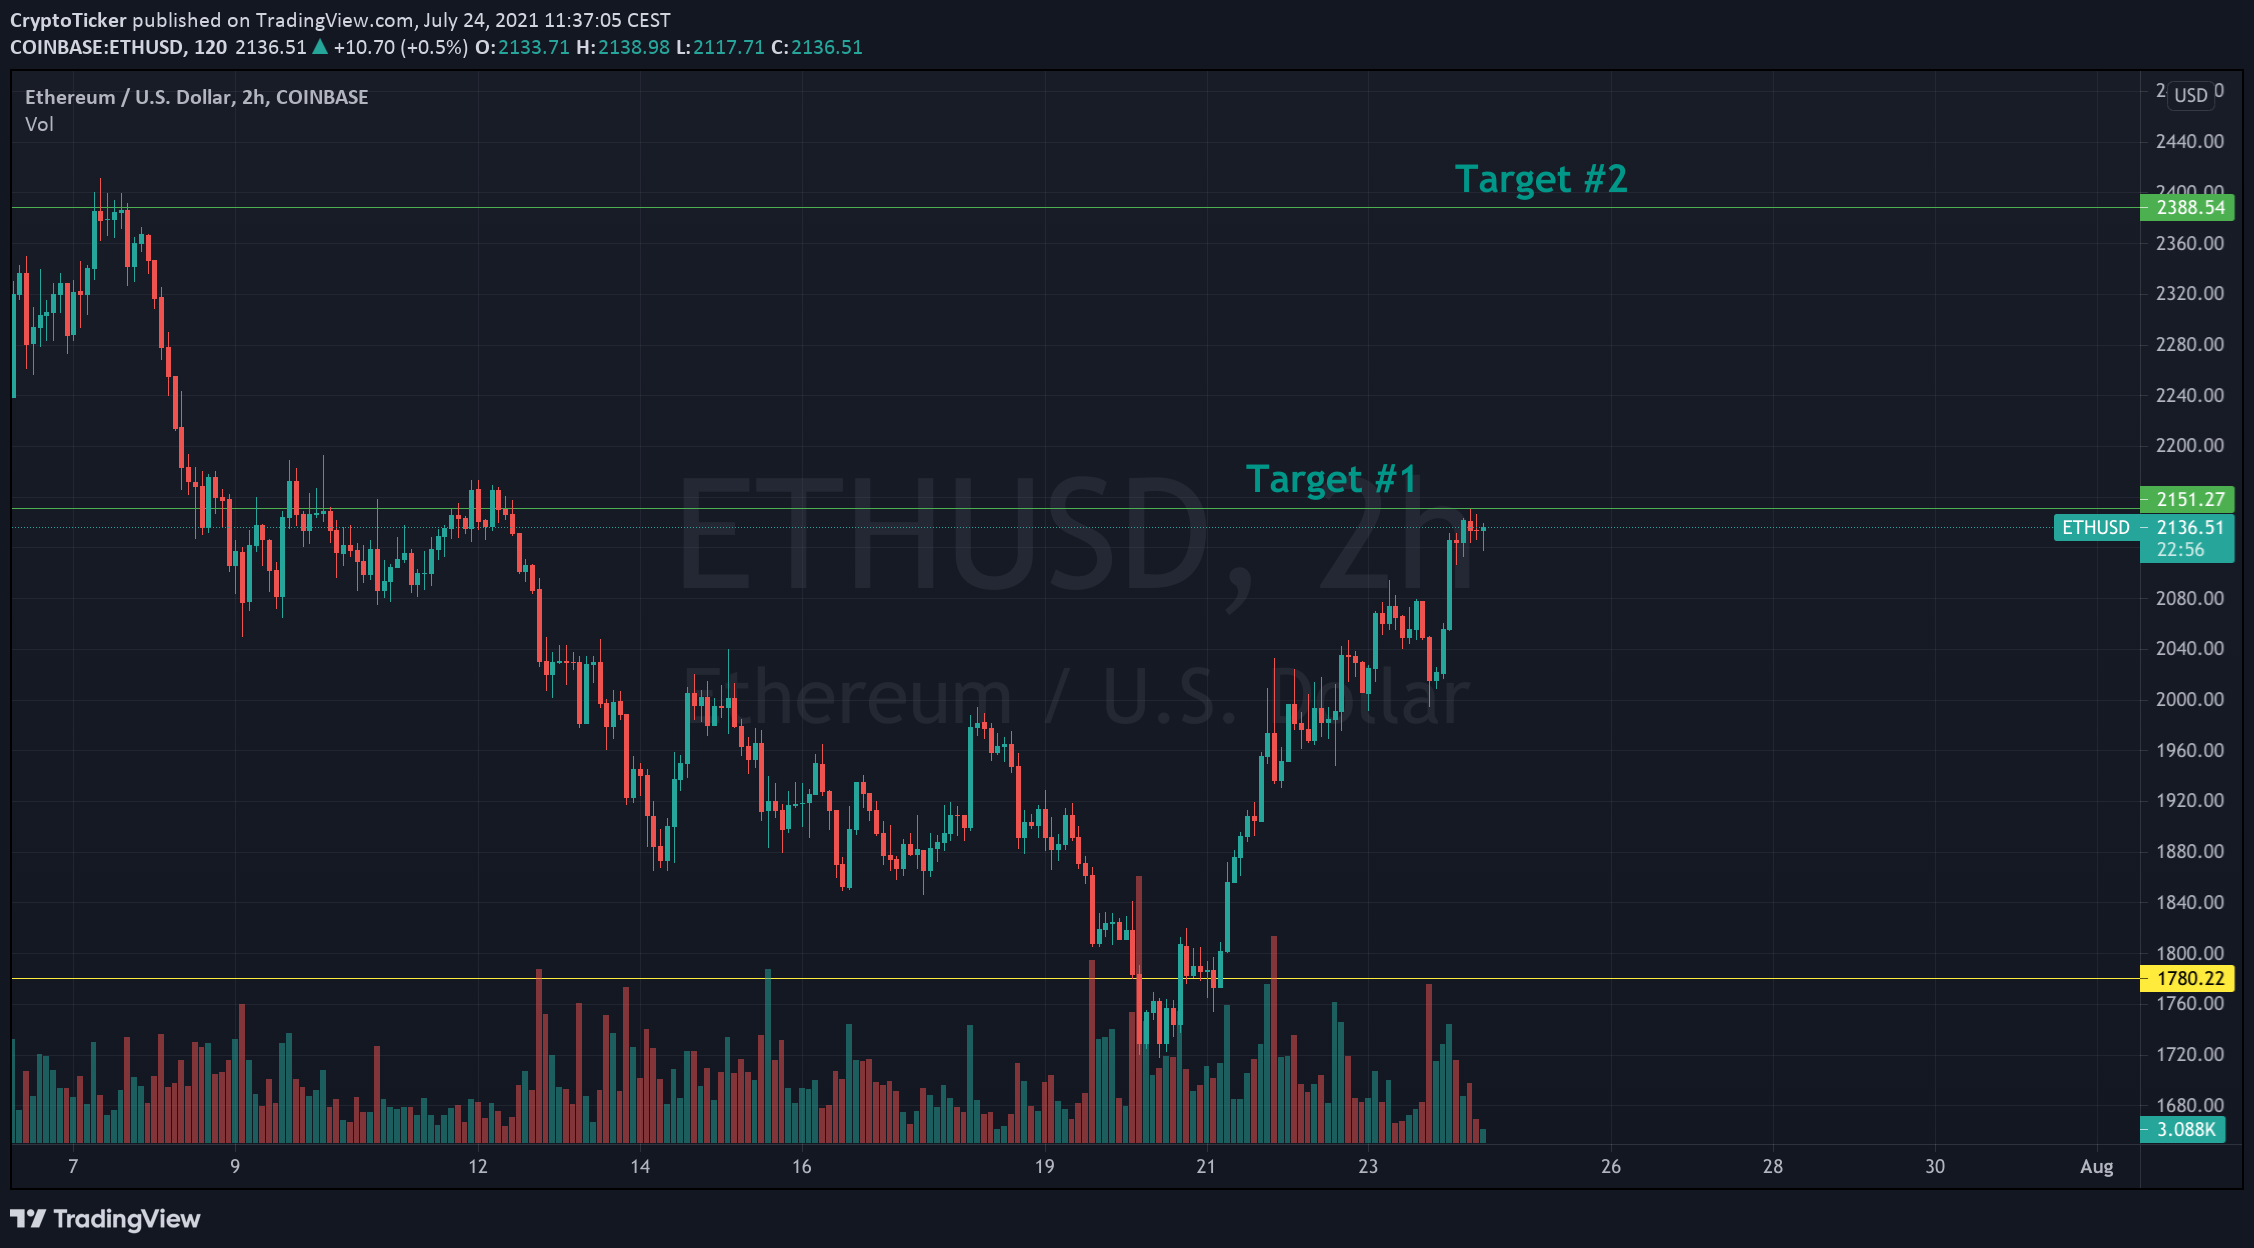 ETH/USD 2-Hours chart showing the second price target for Ether